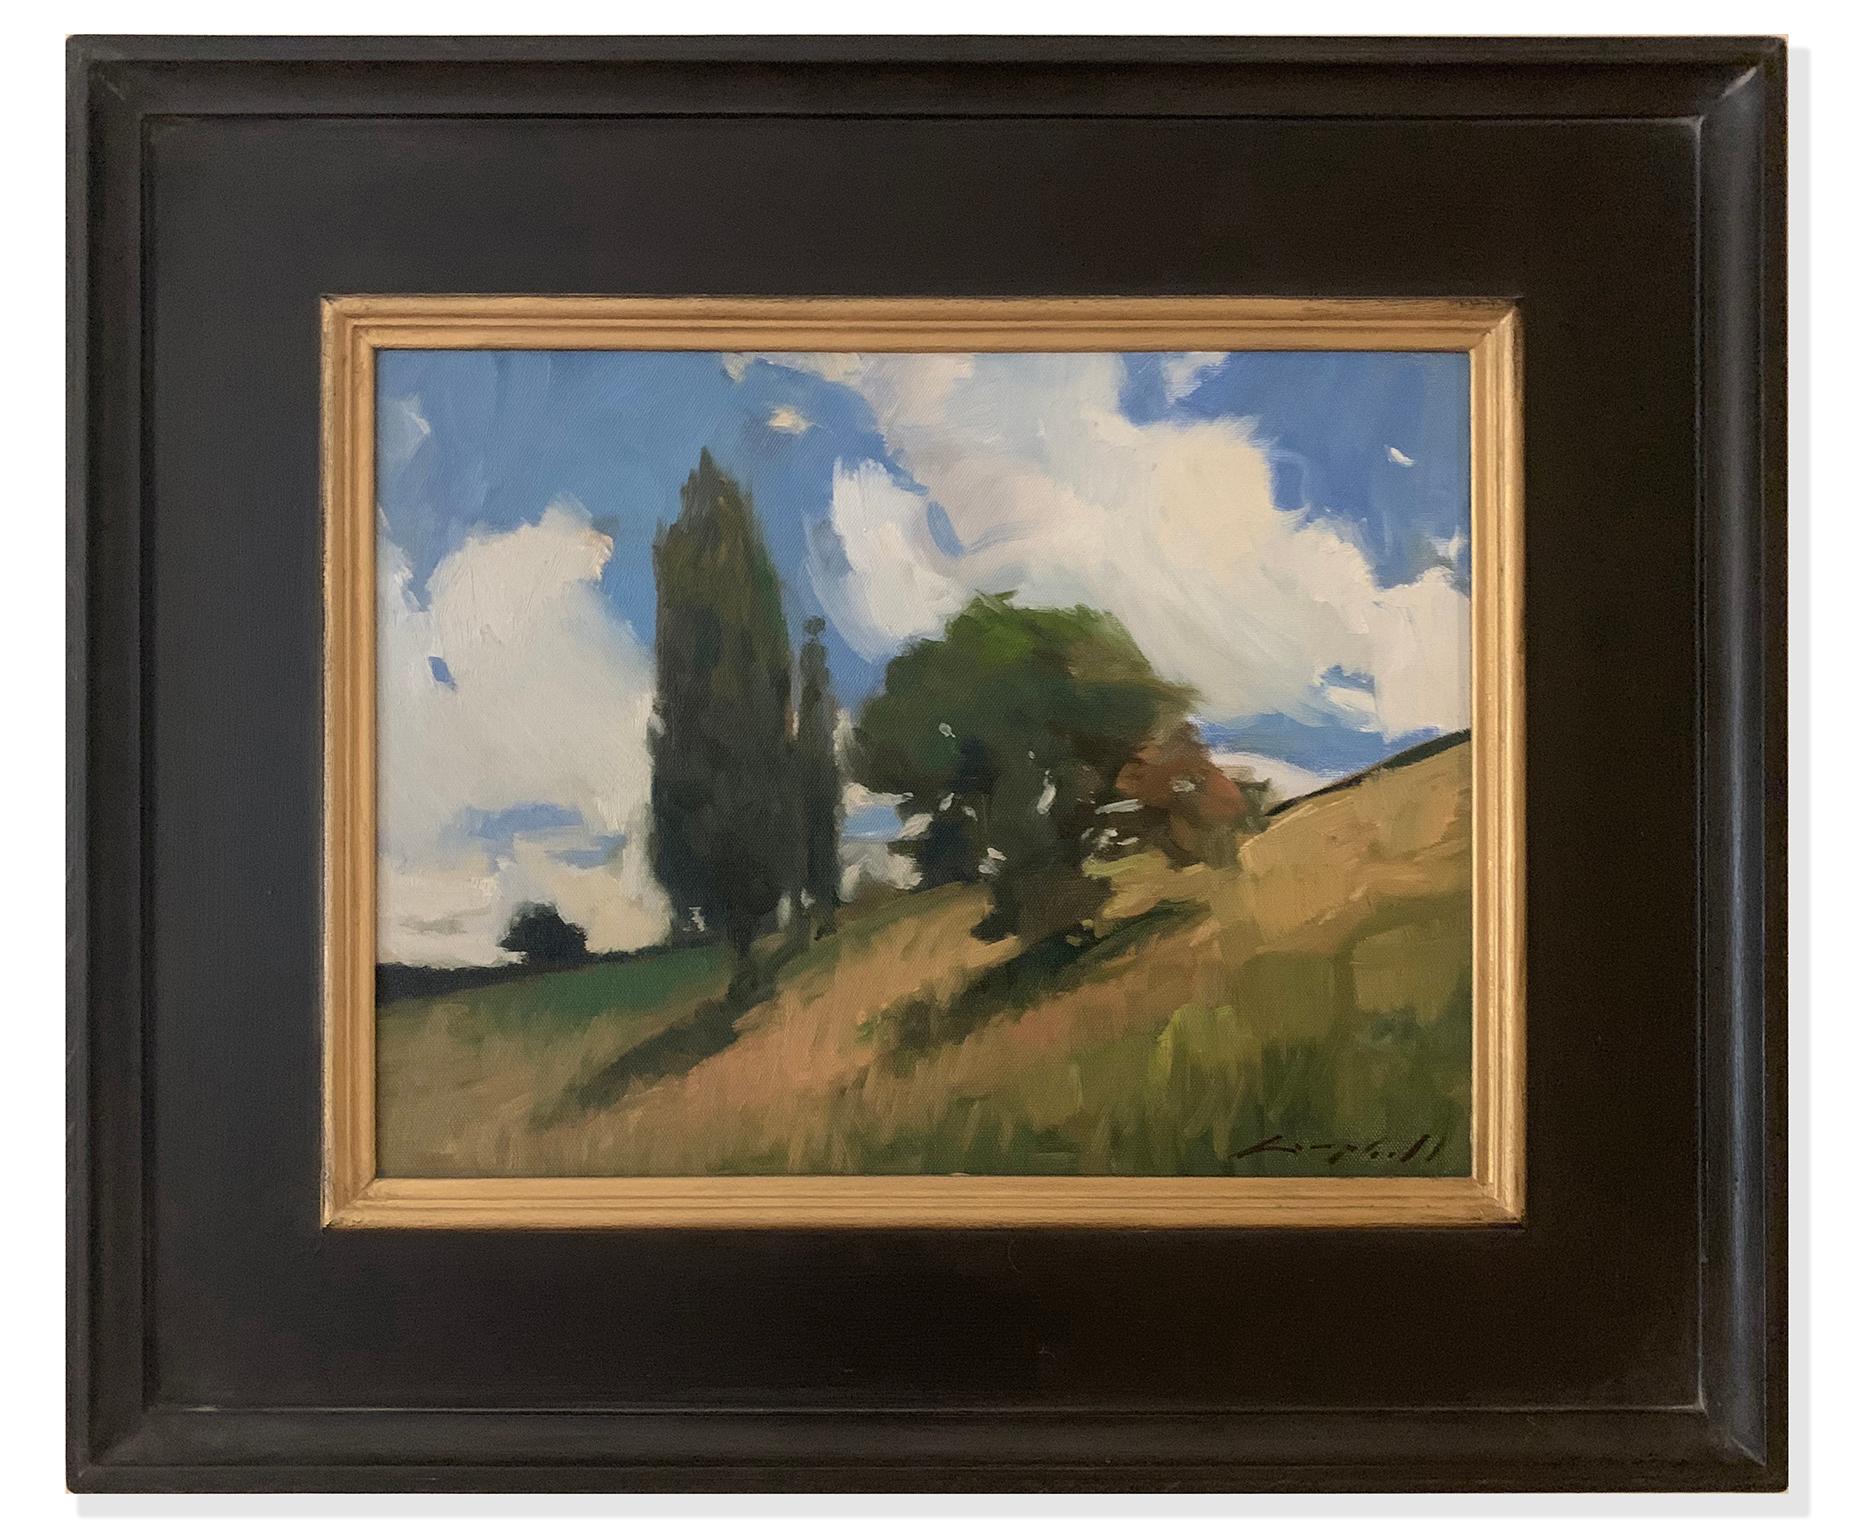 Hillside (big sky, lush trees, golden grass) - Painting by Peter Campbell